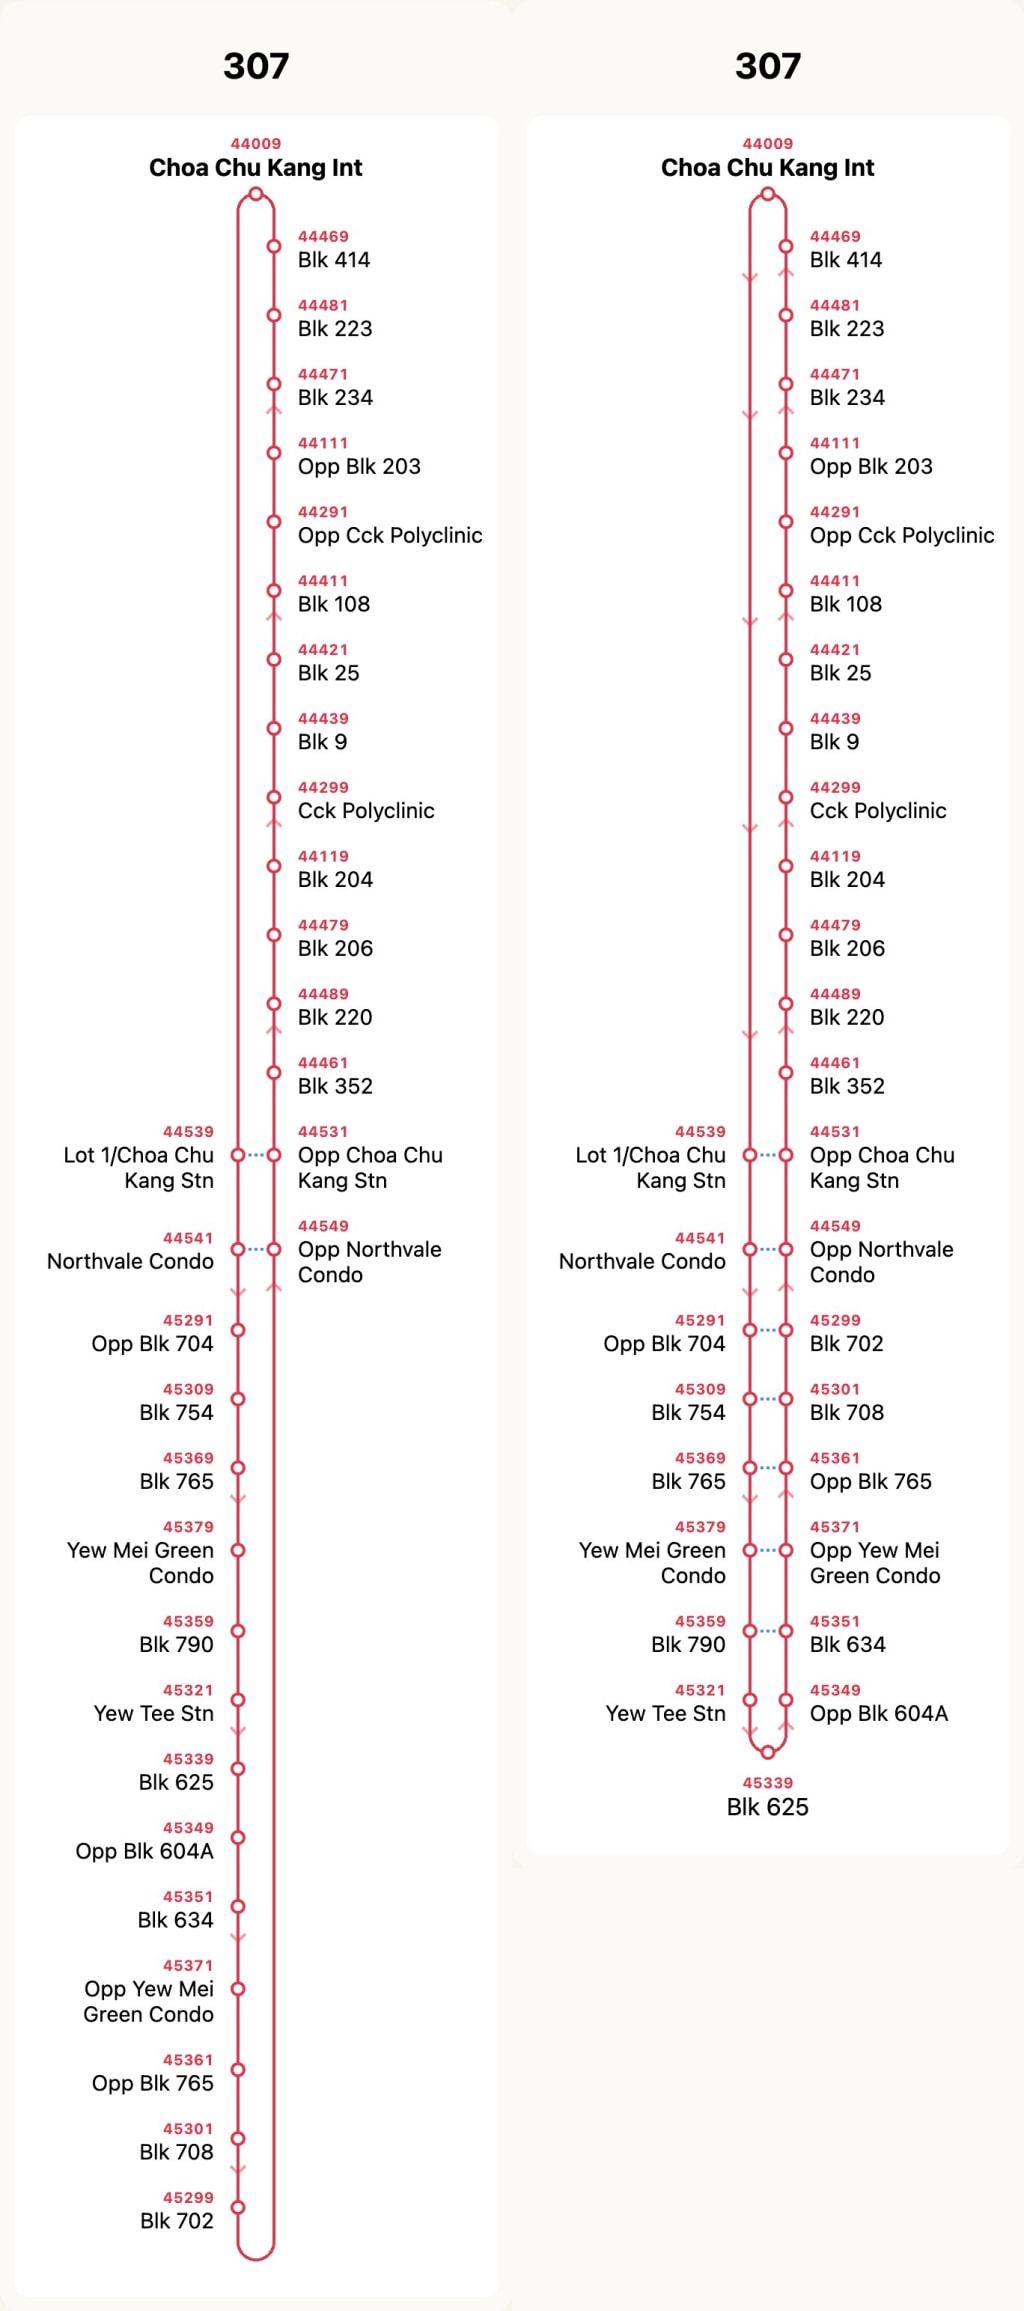 Bus service 307; two versions of its route